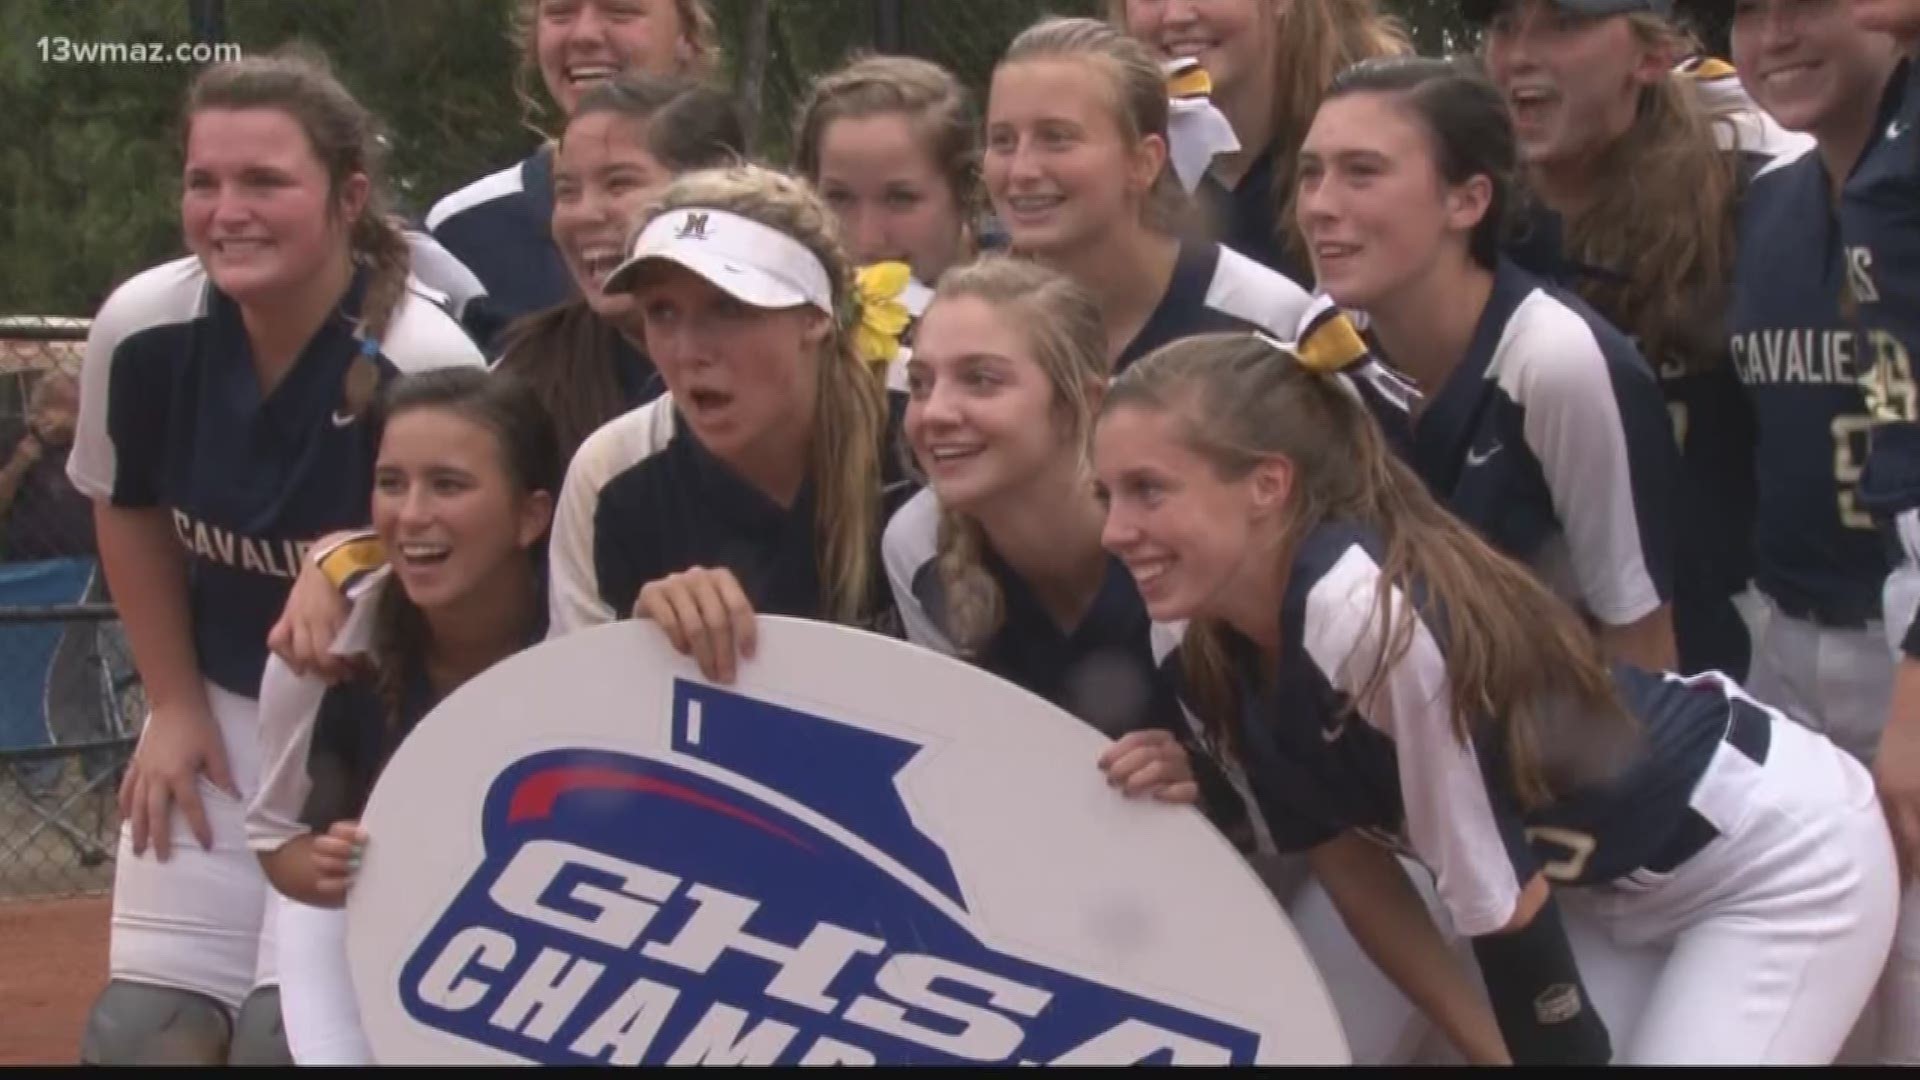 The Westfield School, Mount de Sales, and Windsor Academy all won their respective GISA and GHSA state softball championships.